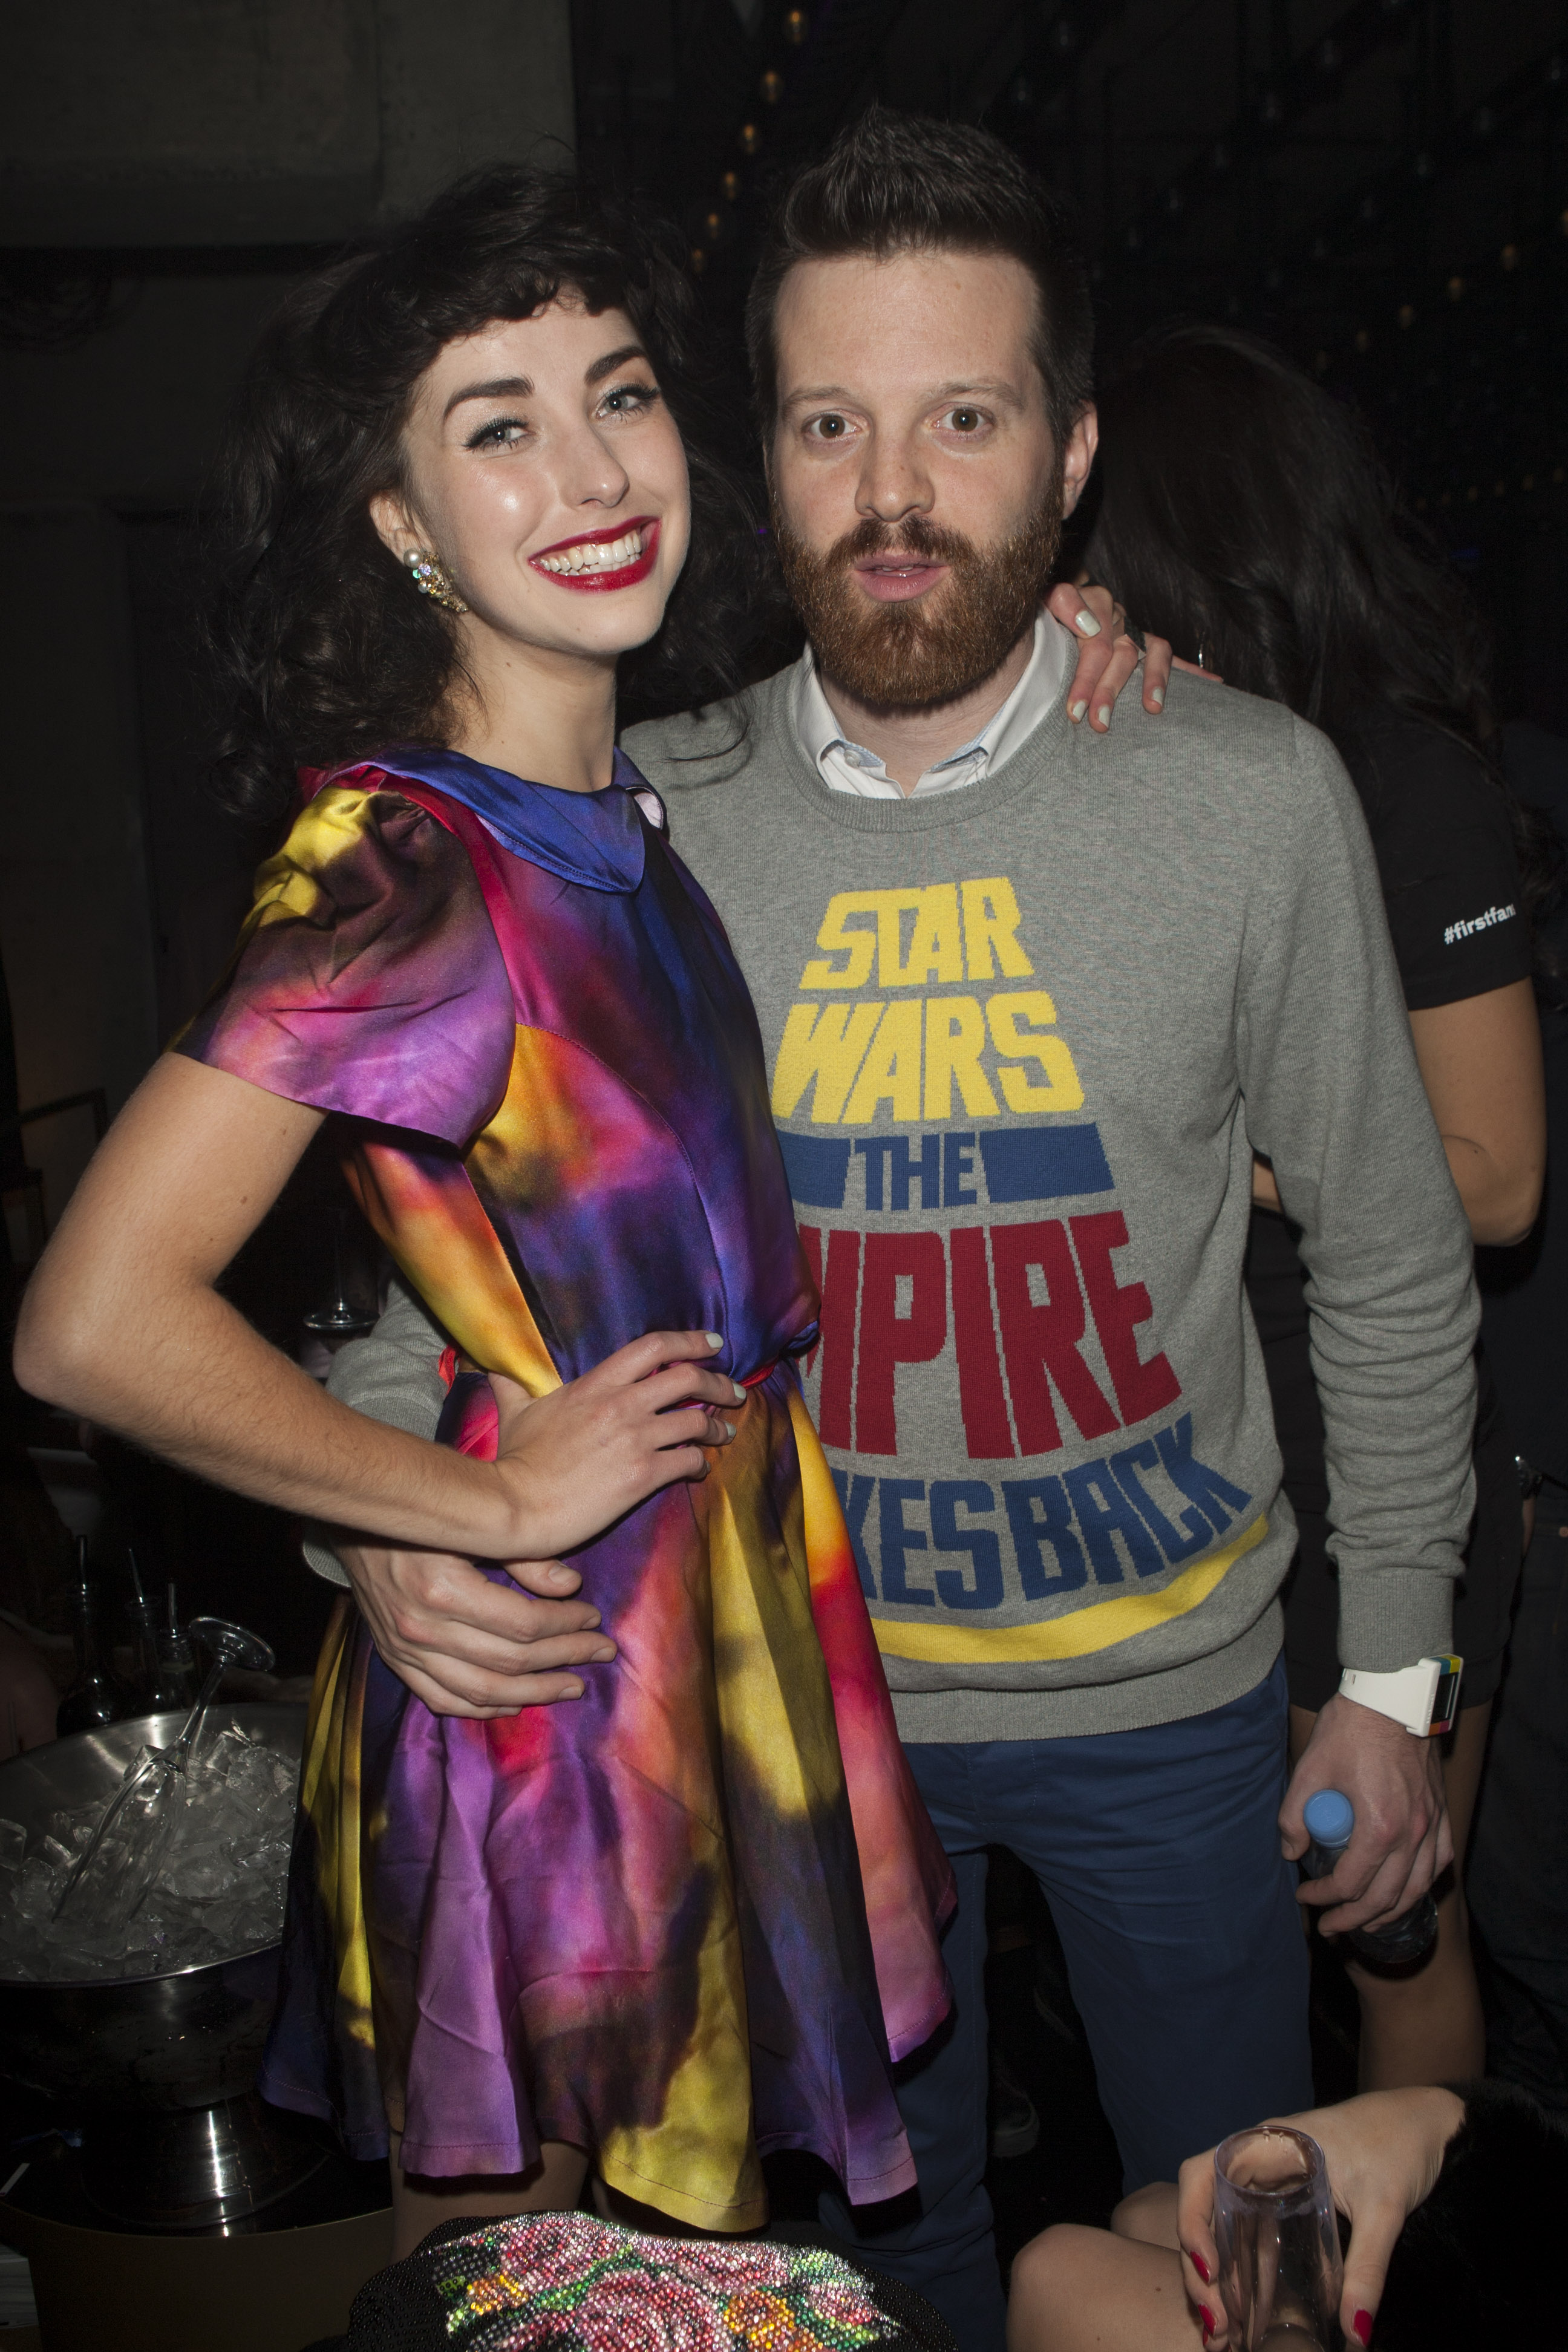 HOLLYWOOD, CA - FEBRUARY 10:  Recording artists Kimbra and Mayer Hawthorne attend Republic Records Post Grammy Party at The Emerson Theatre on February 10, 2013 in Hollywood, California.  (Photo by Michael Bezjian/WireImage)